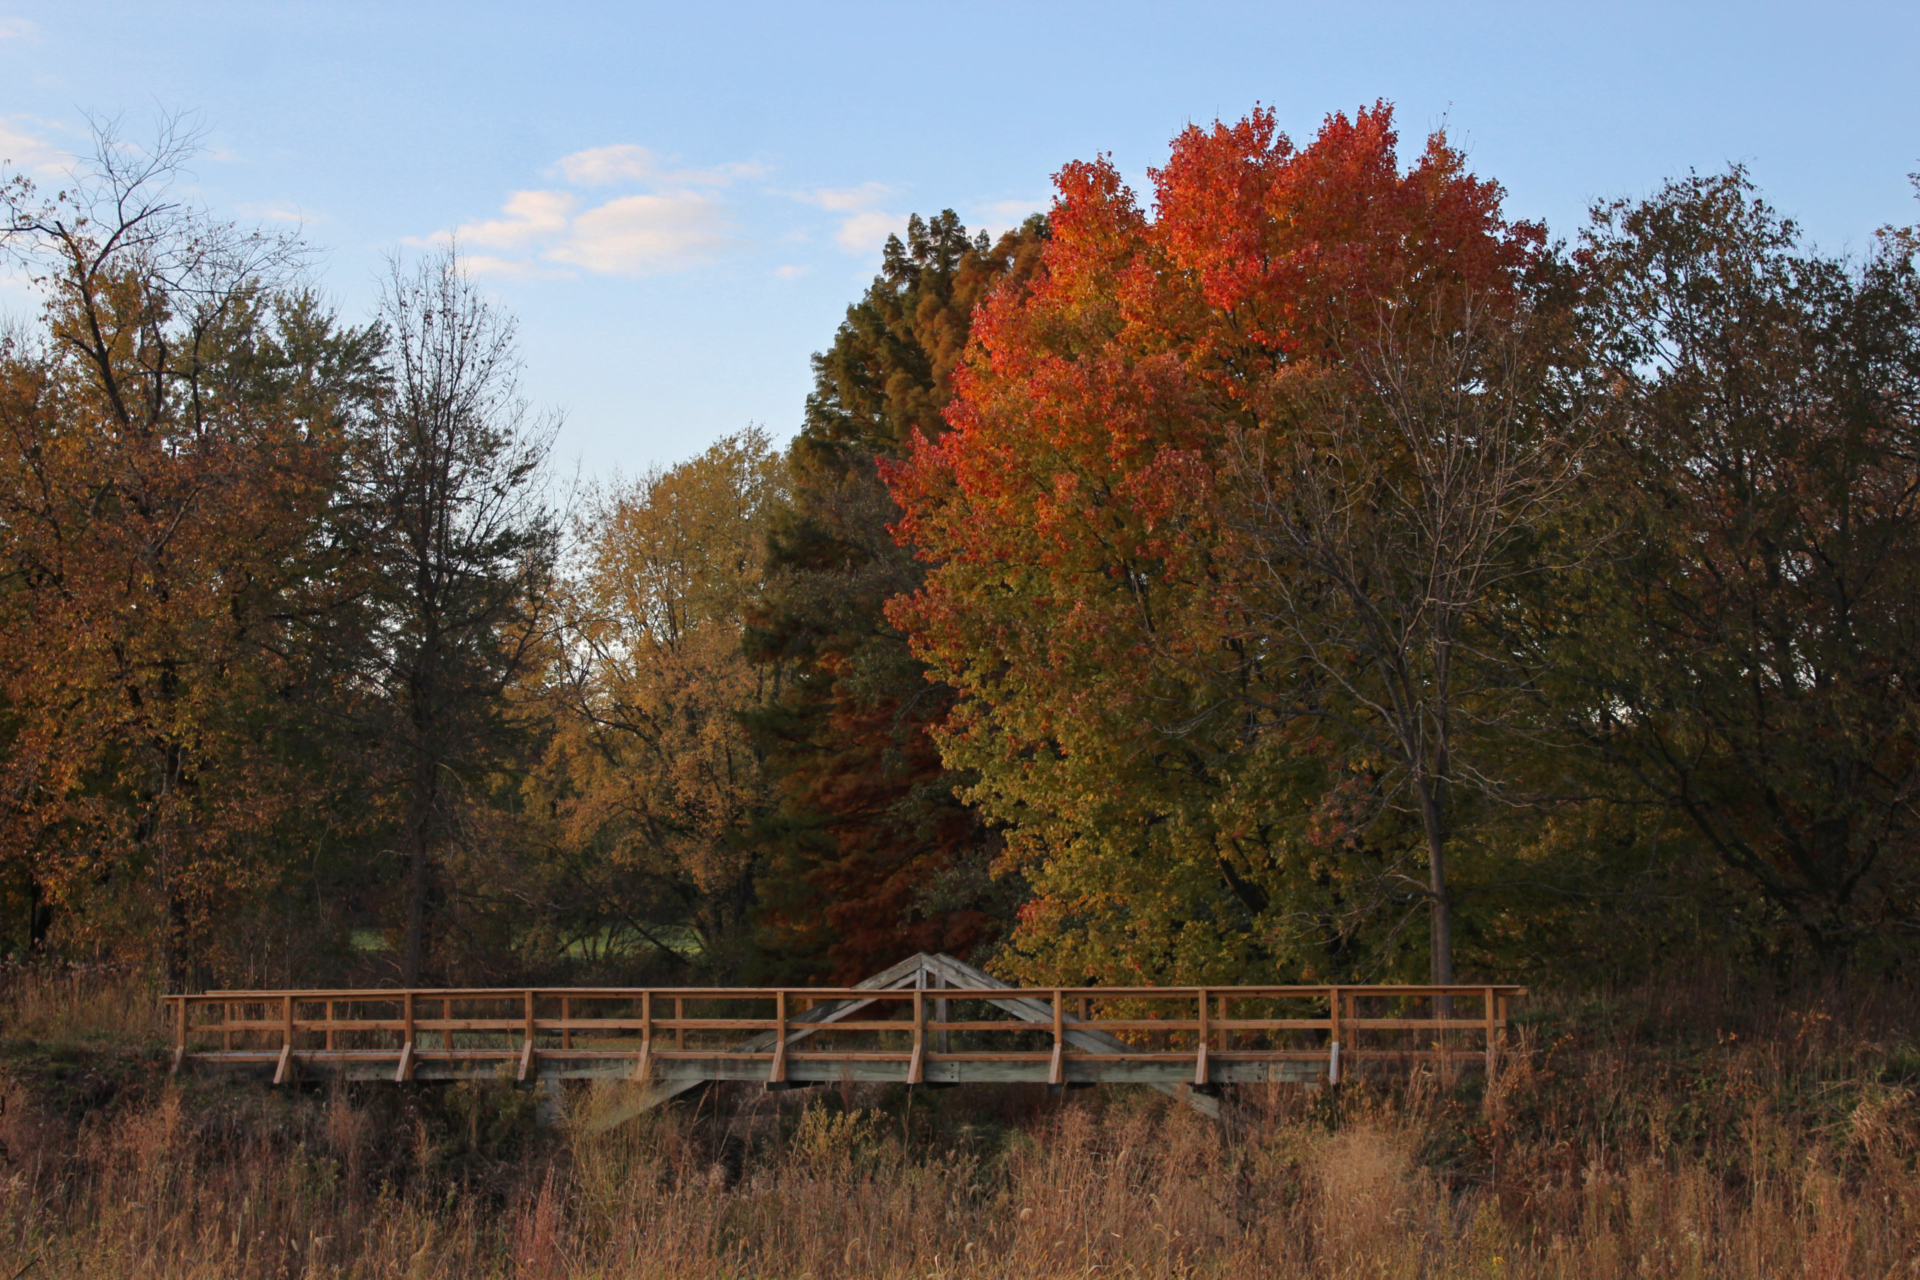 Early fall colors emerging by the Dupage River bridge on the Arboretum's west side